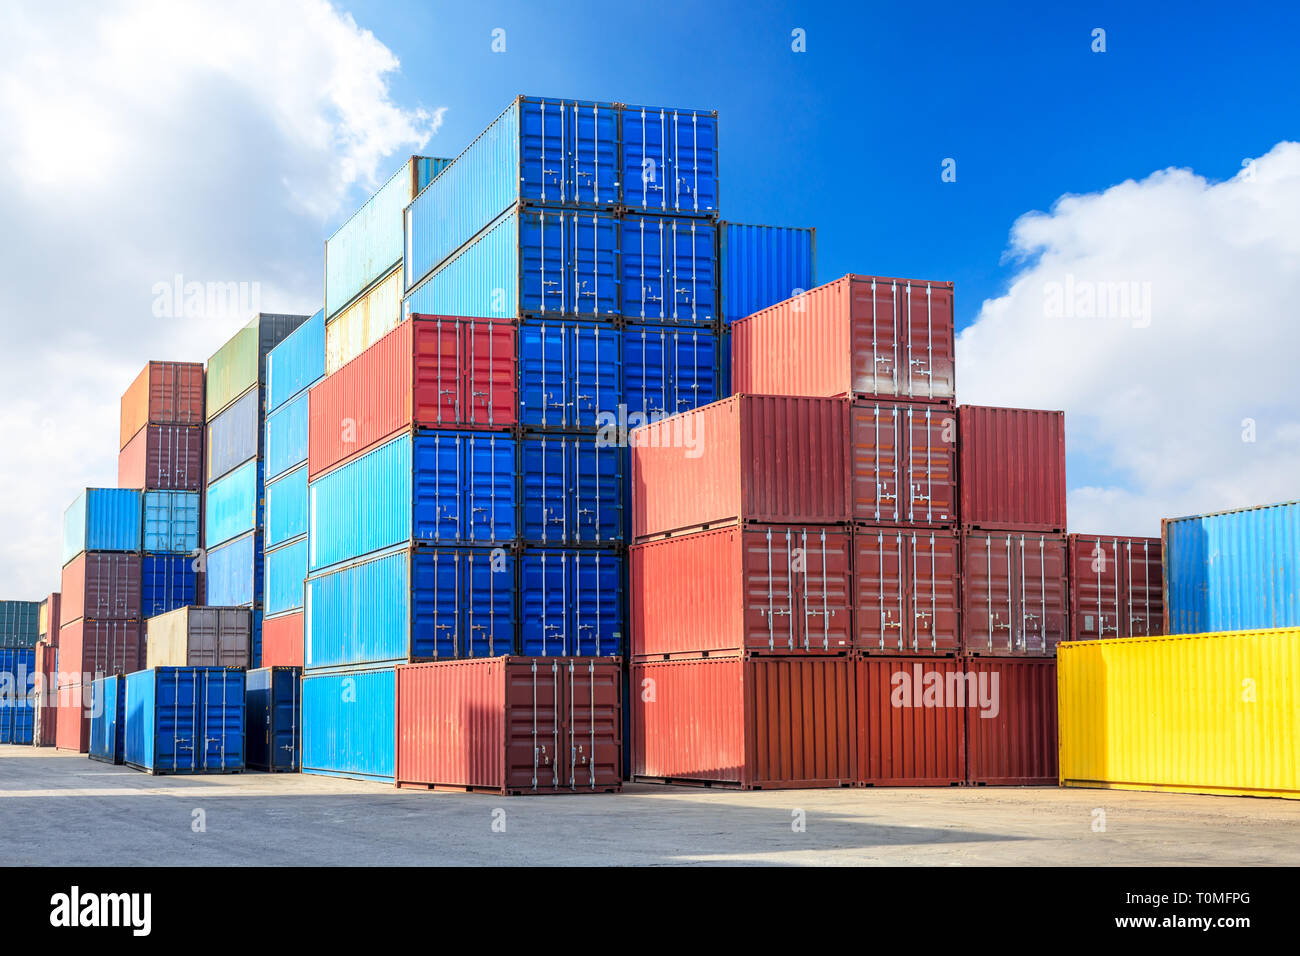 Industrial Container yard for Logistic Import Export business Stock Photo